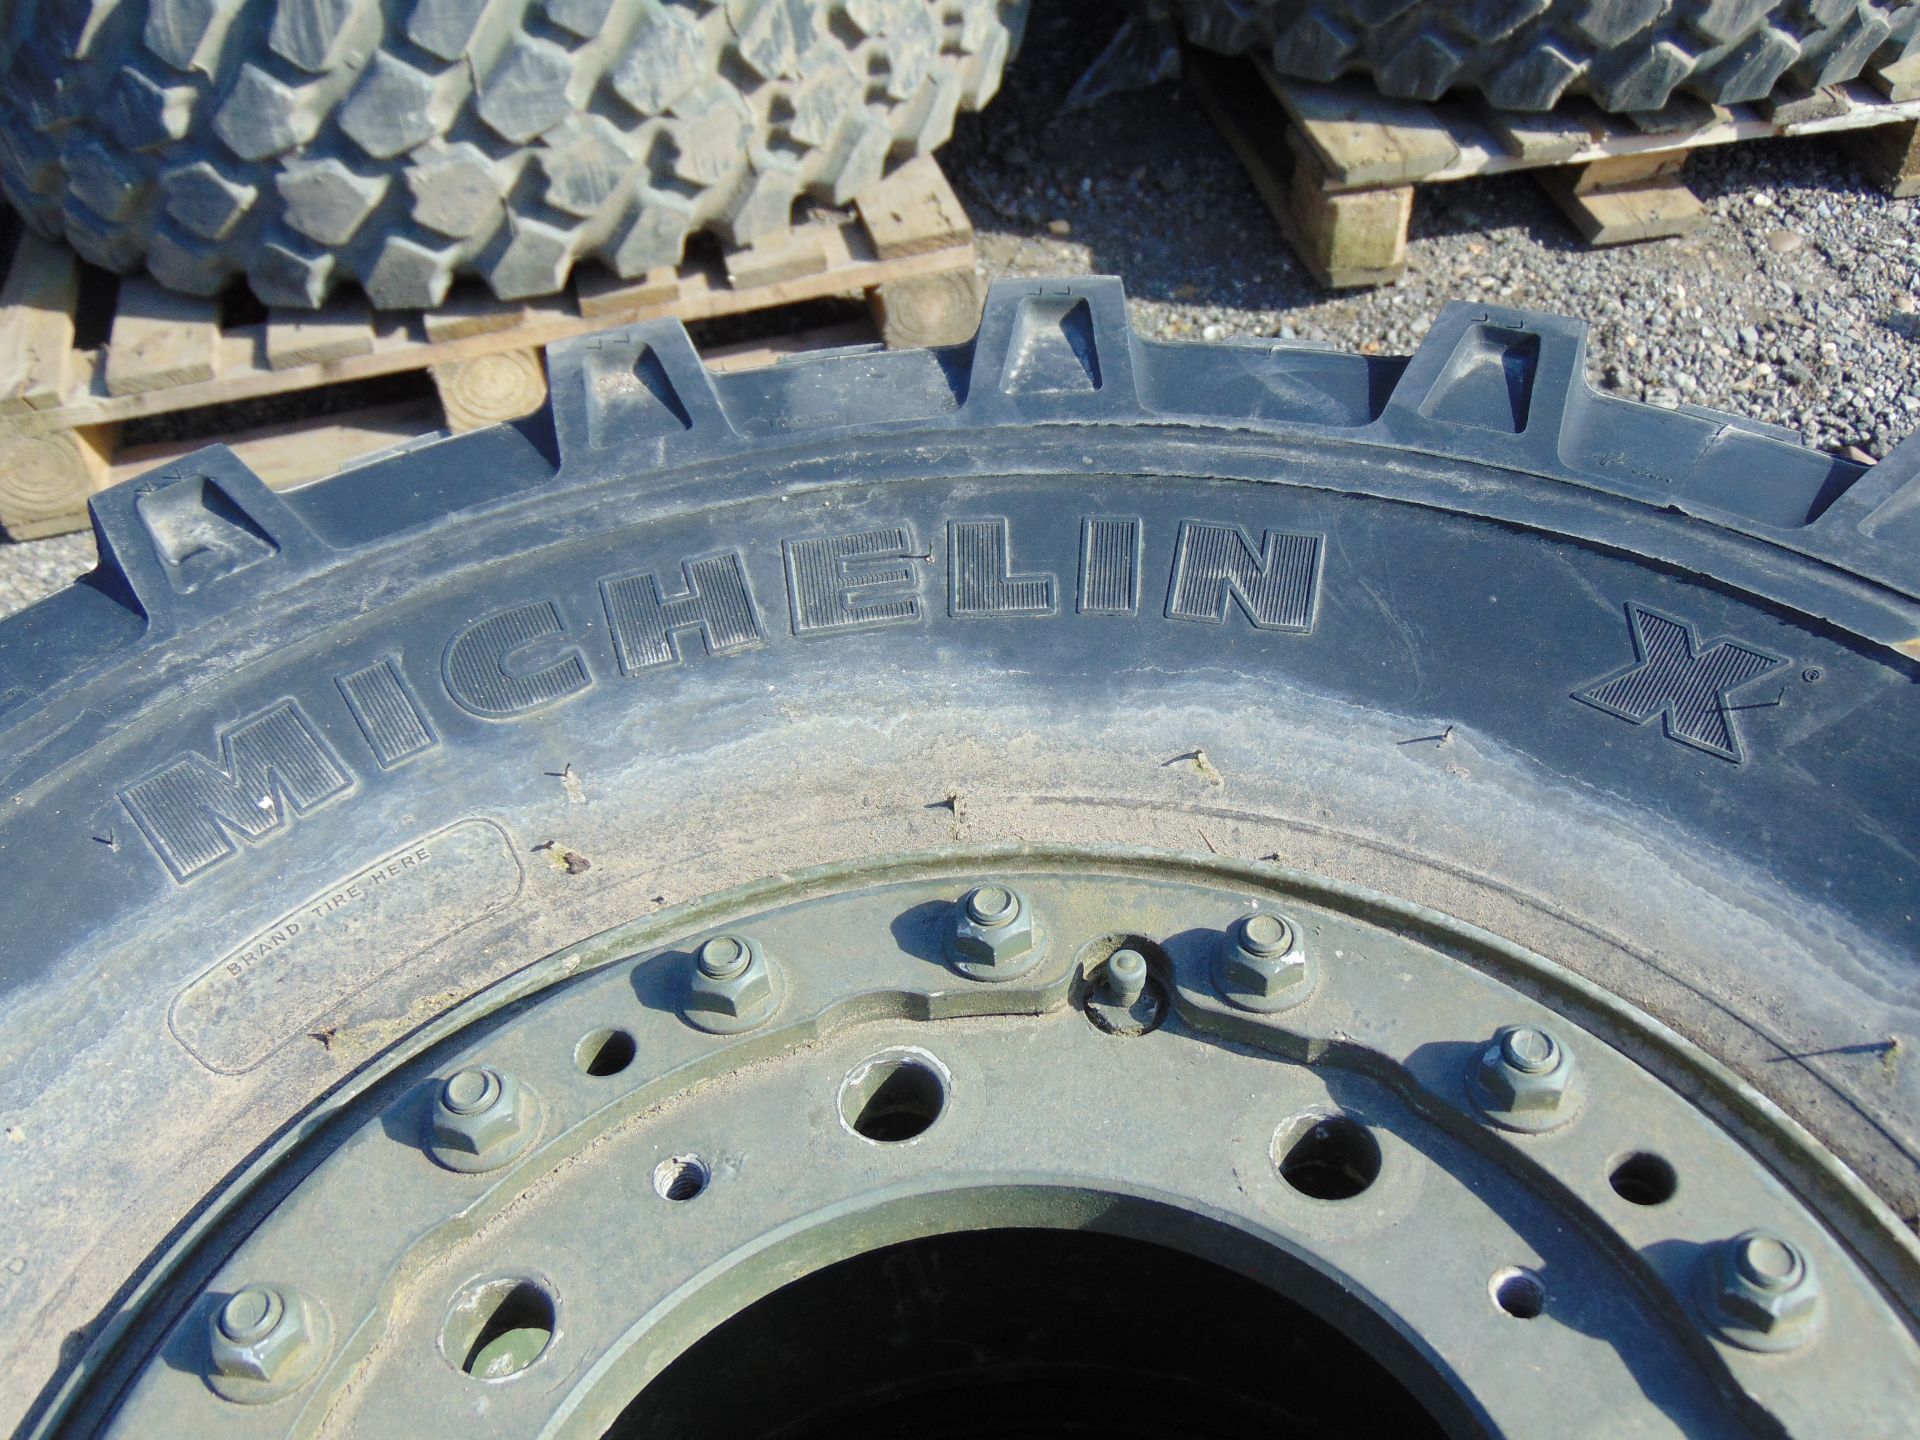 2 x Michelin 325/85 R16 XML Tyres with 8 Stud Rims - Image 5 of 6